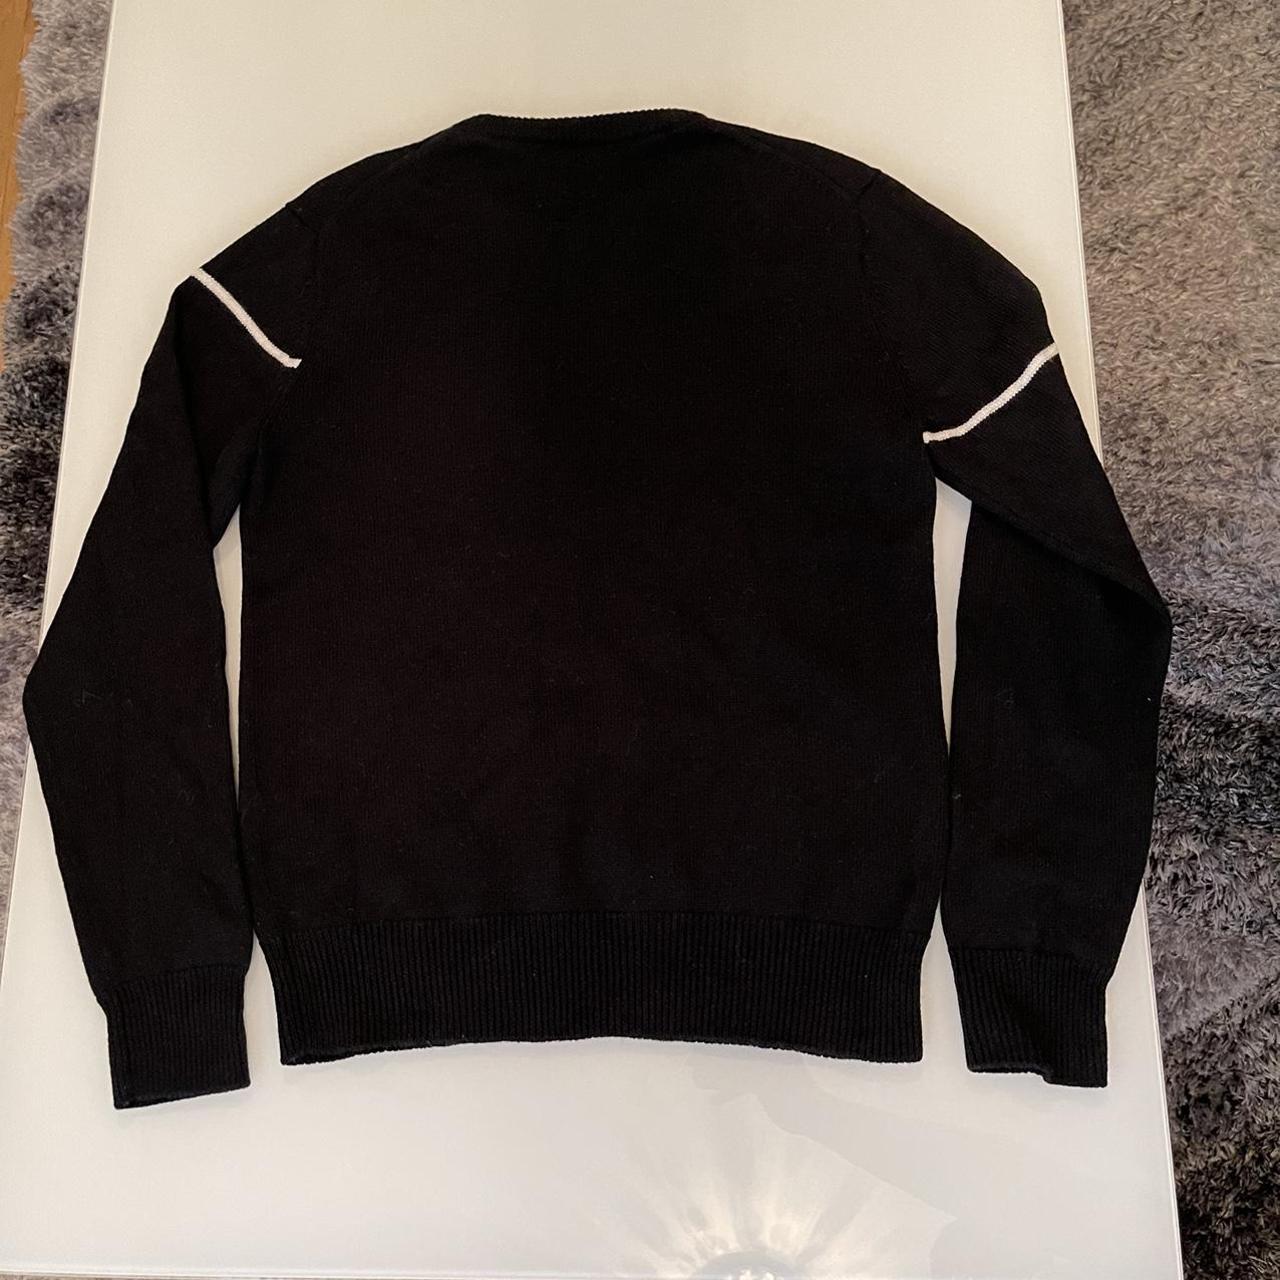 100% authentic Givenchy jumper like new condition,... - Depop